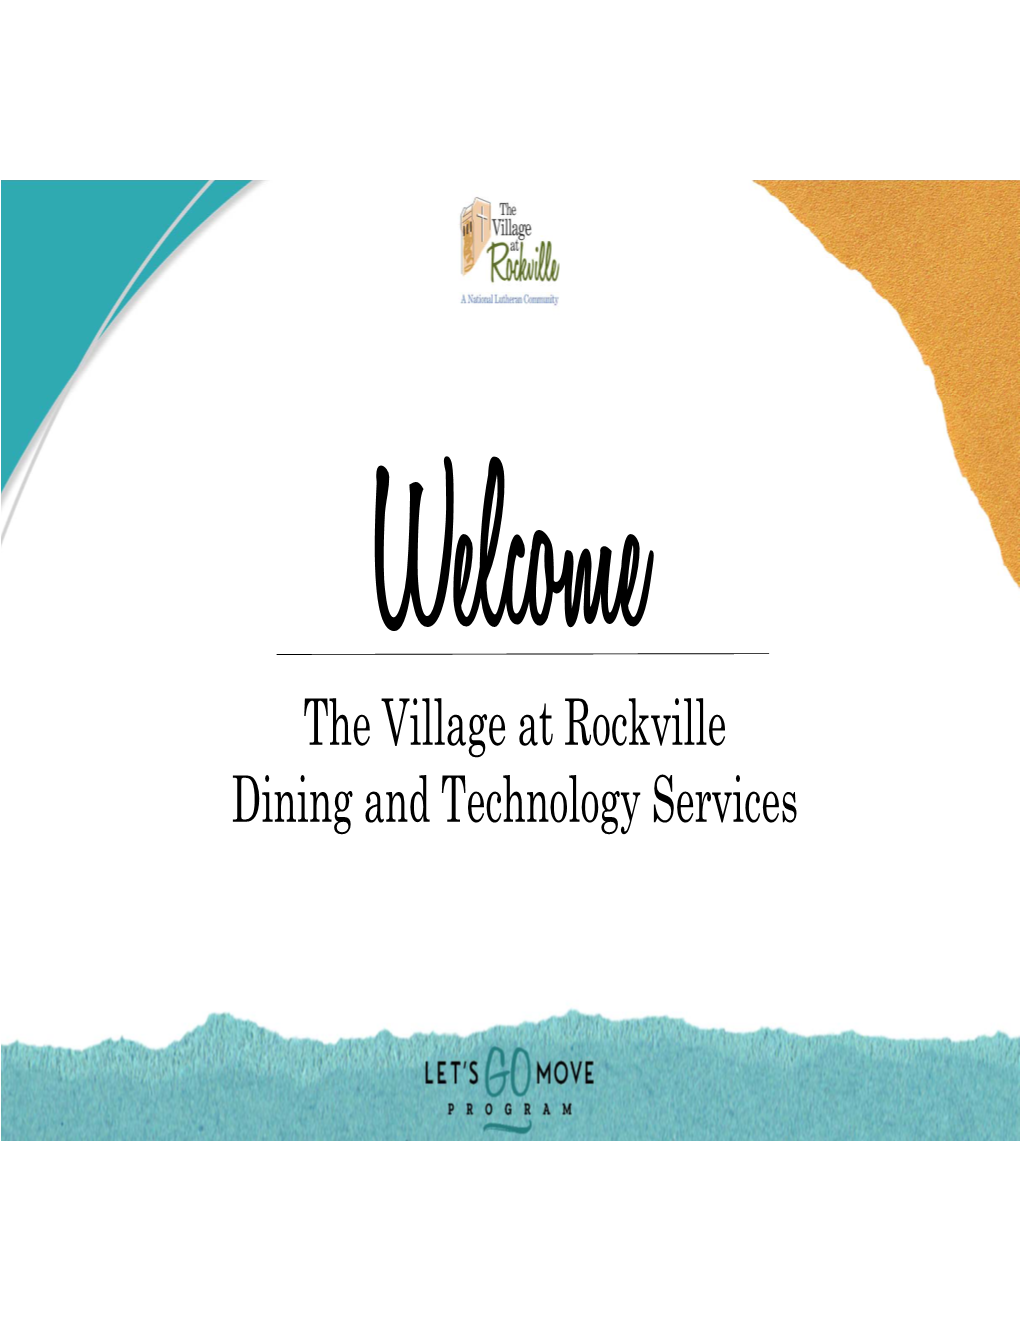 The Village at Rockville Dining and Technology Services